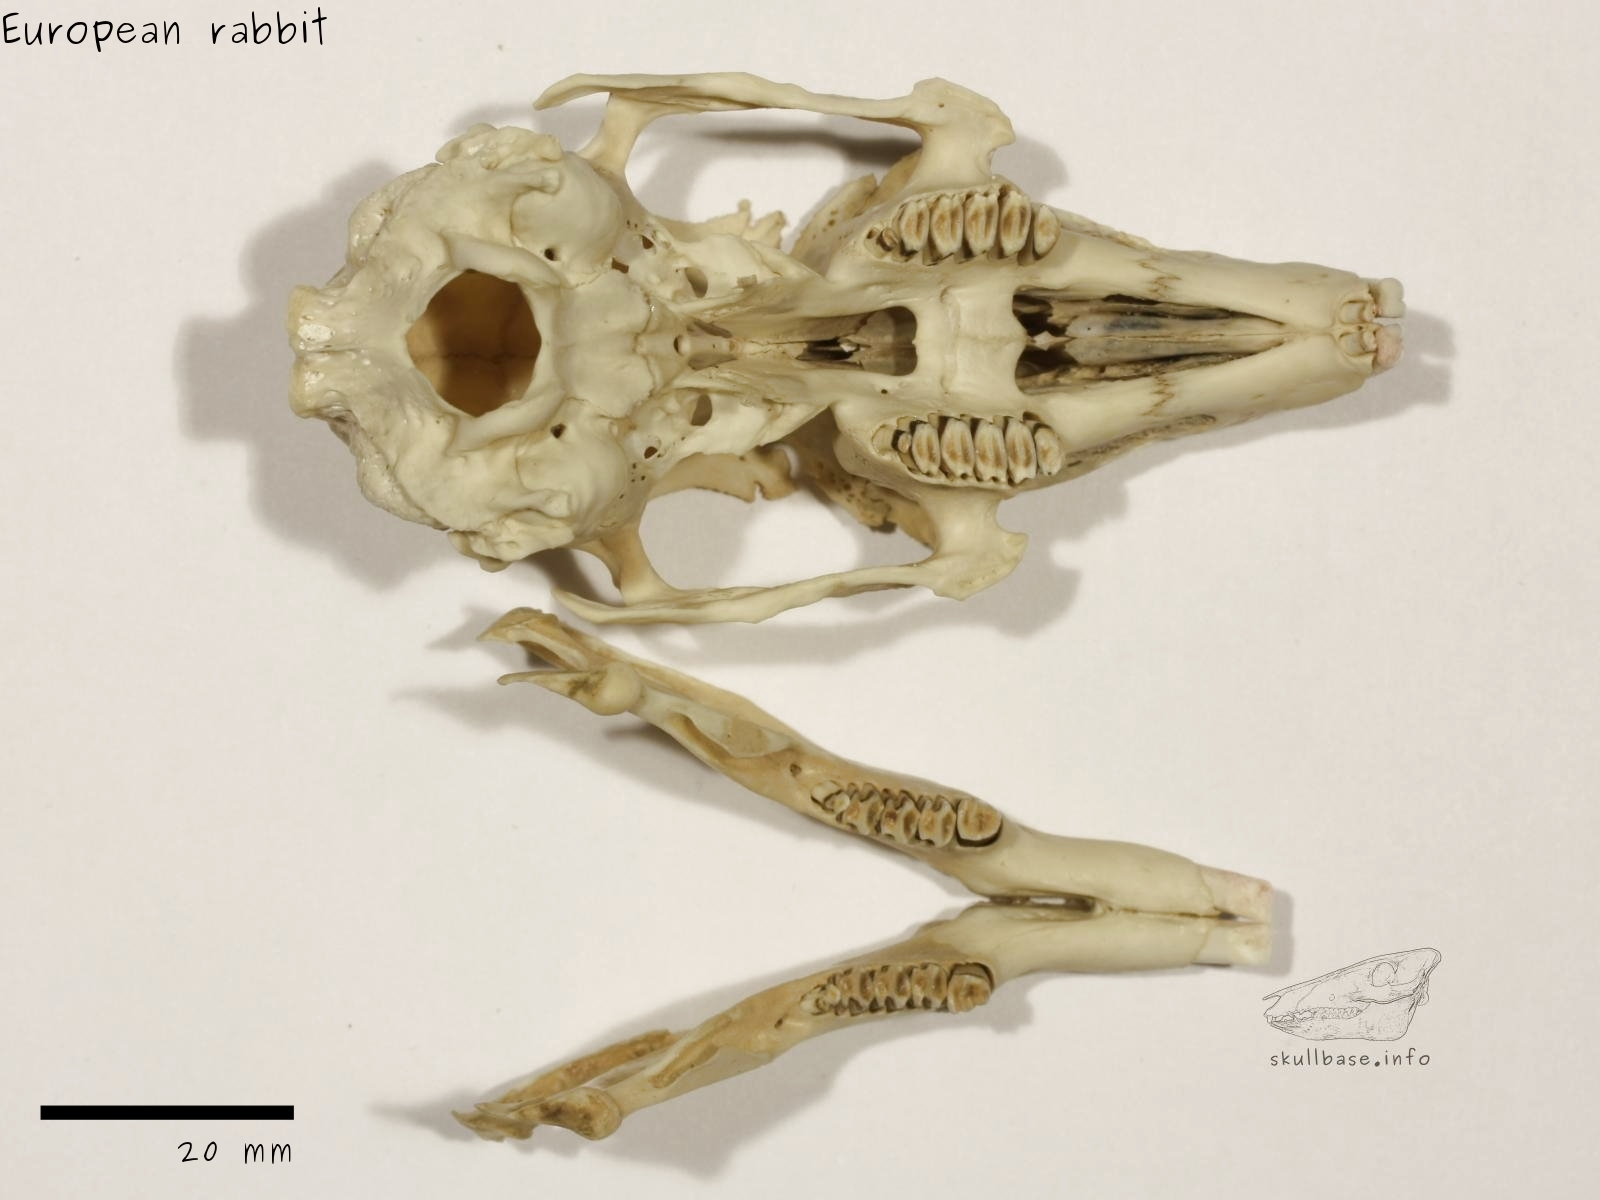 European rabbit (Oryctolagus cuniculus) skull ventral view and jaw